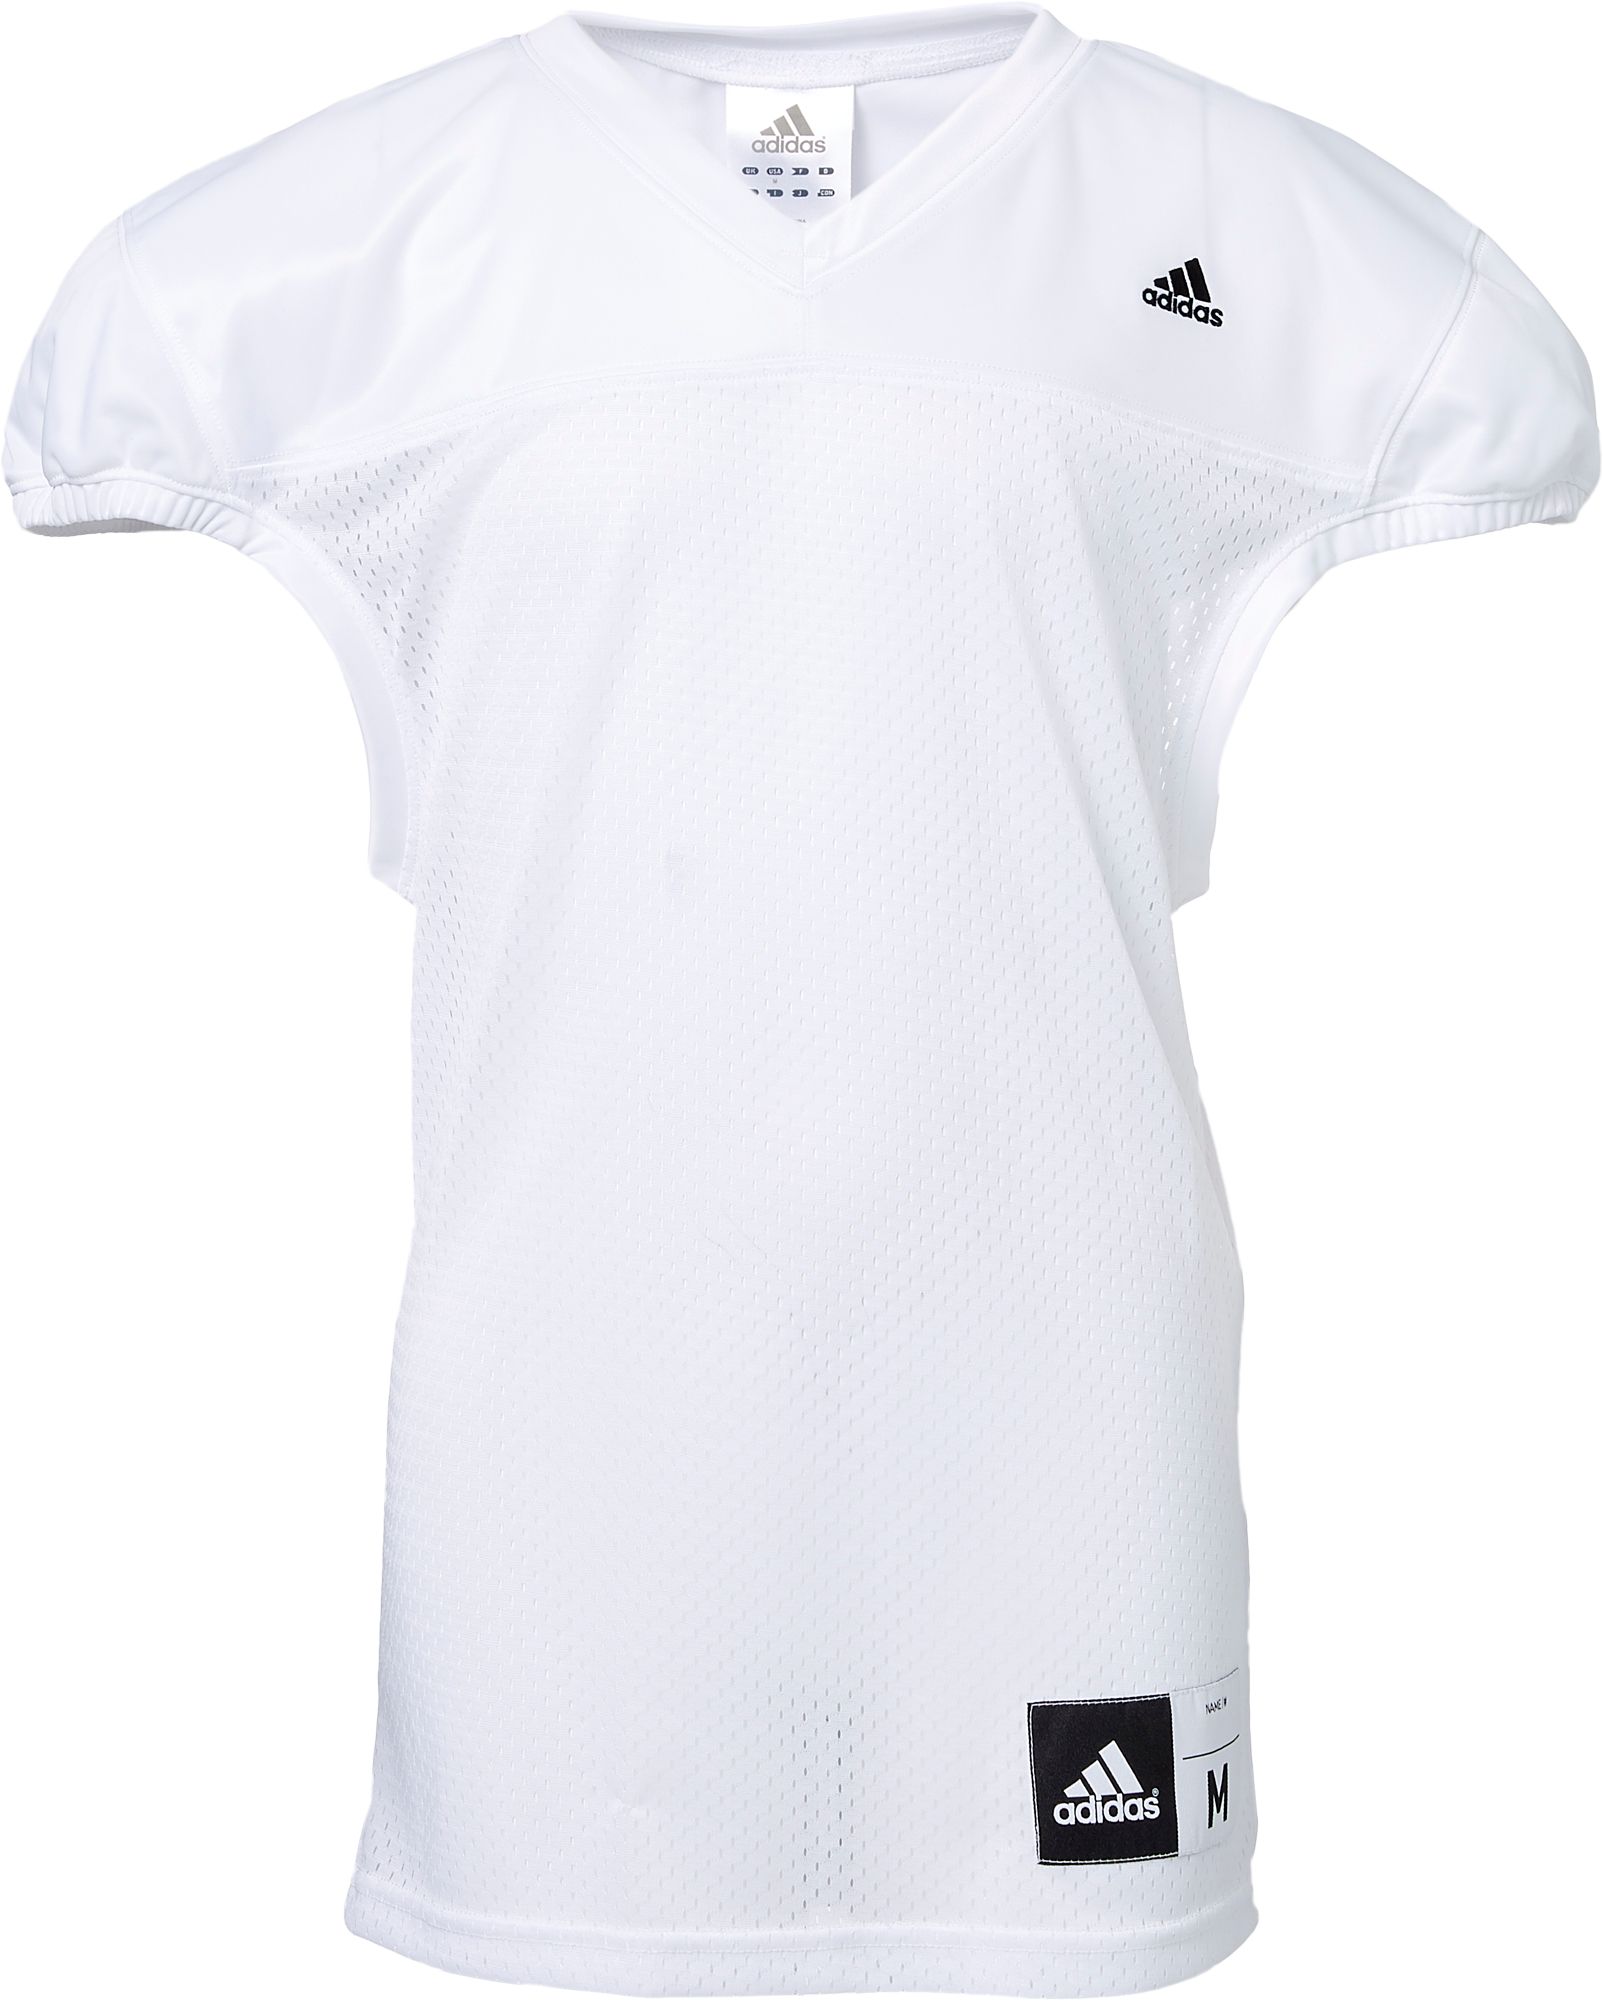 under armour youth football practice jersey